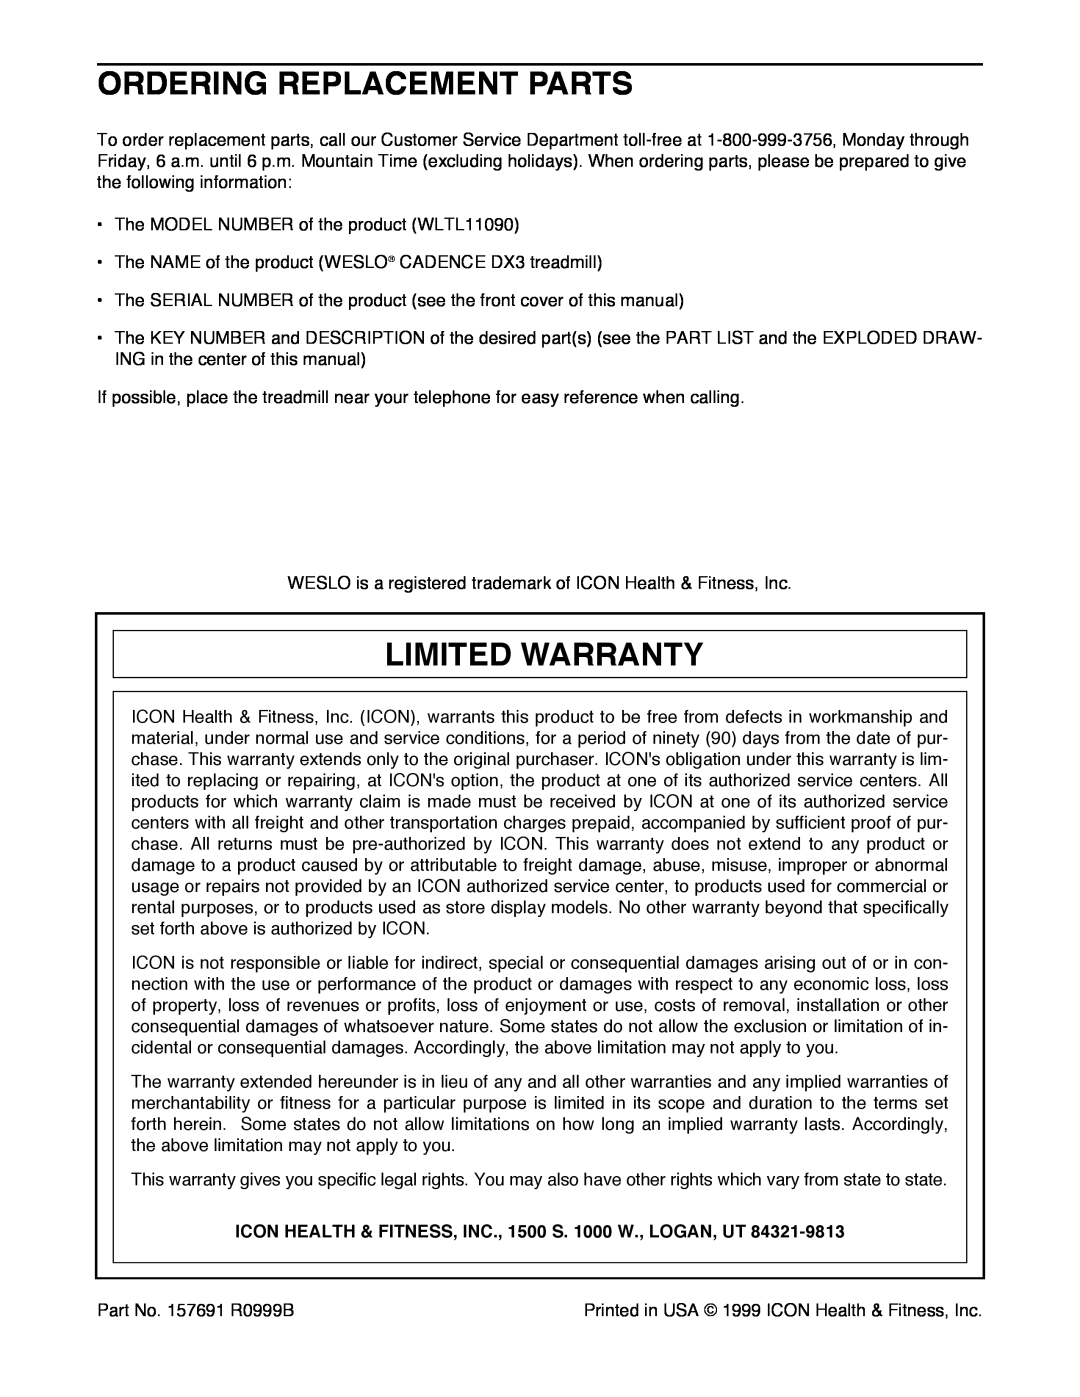 Weslo DX3 user manual Ordering Replacement Parts, Limited Warranty, ICON HEALTH & FITNESS, INC., 1500 S. 1000 W., LOGAN, UT 